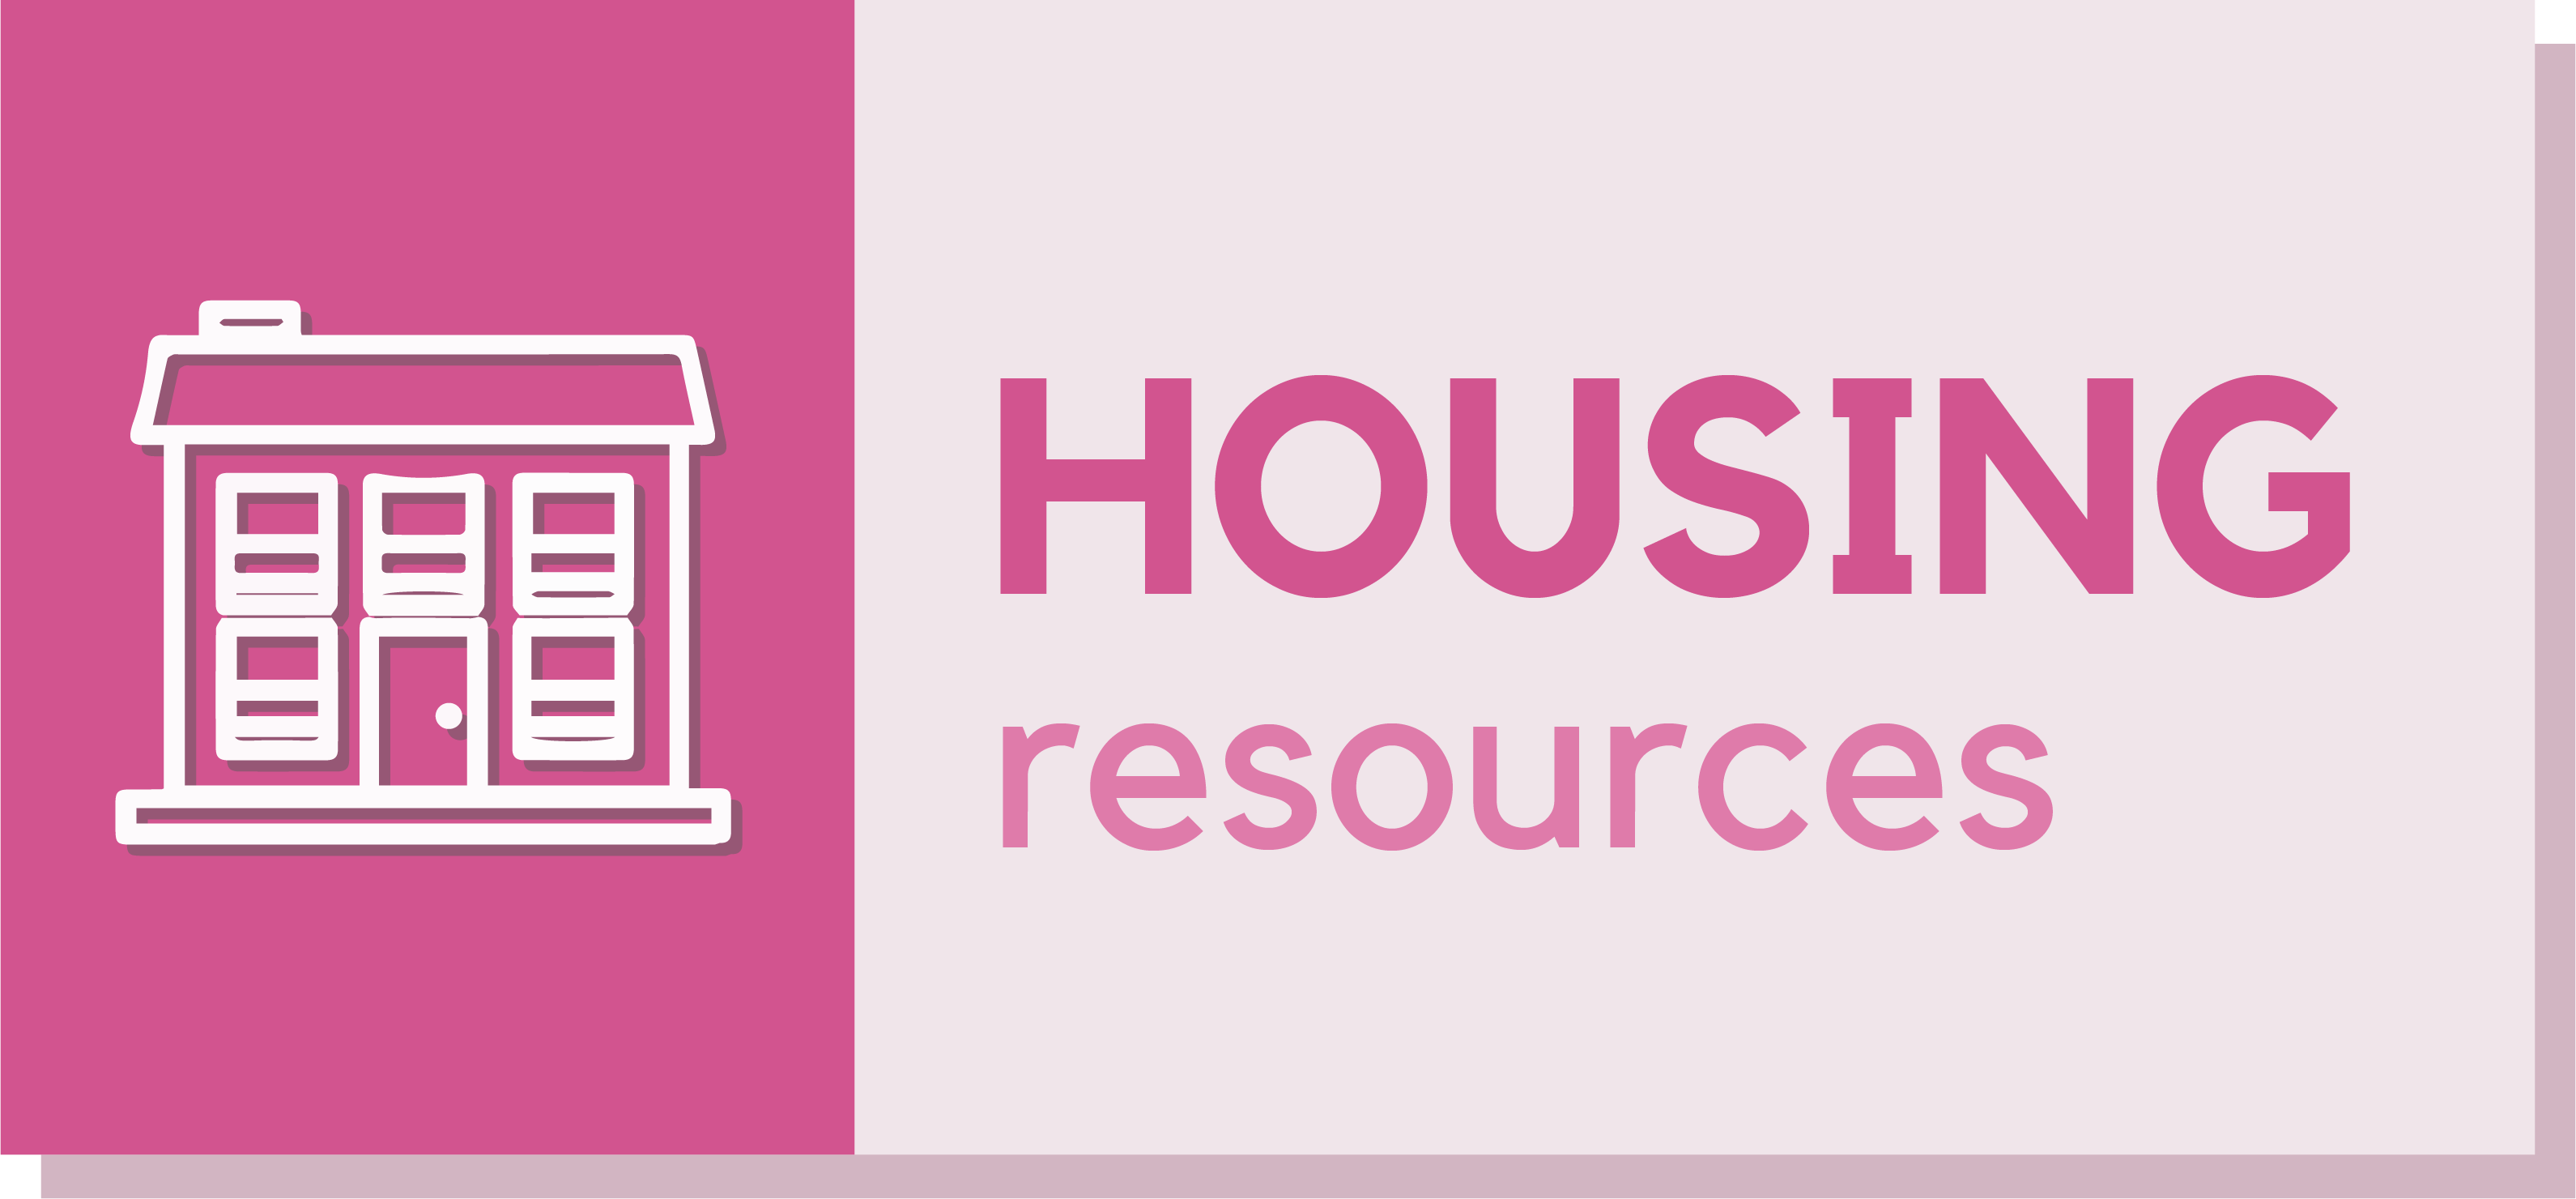 Housing Resources